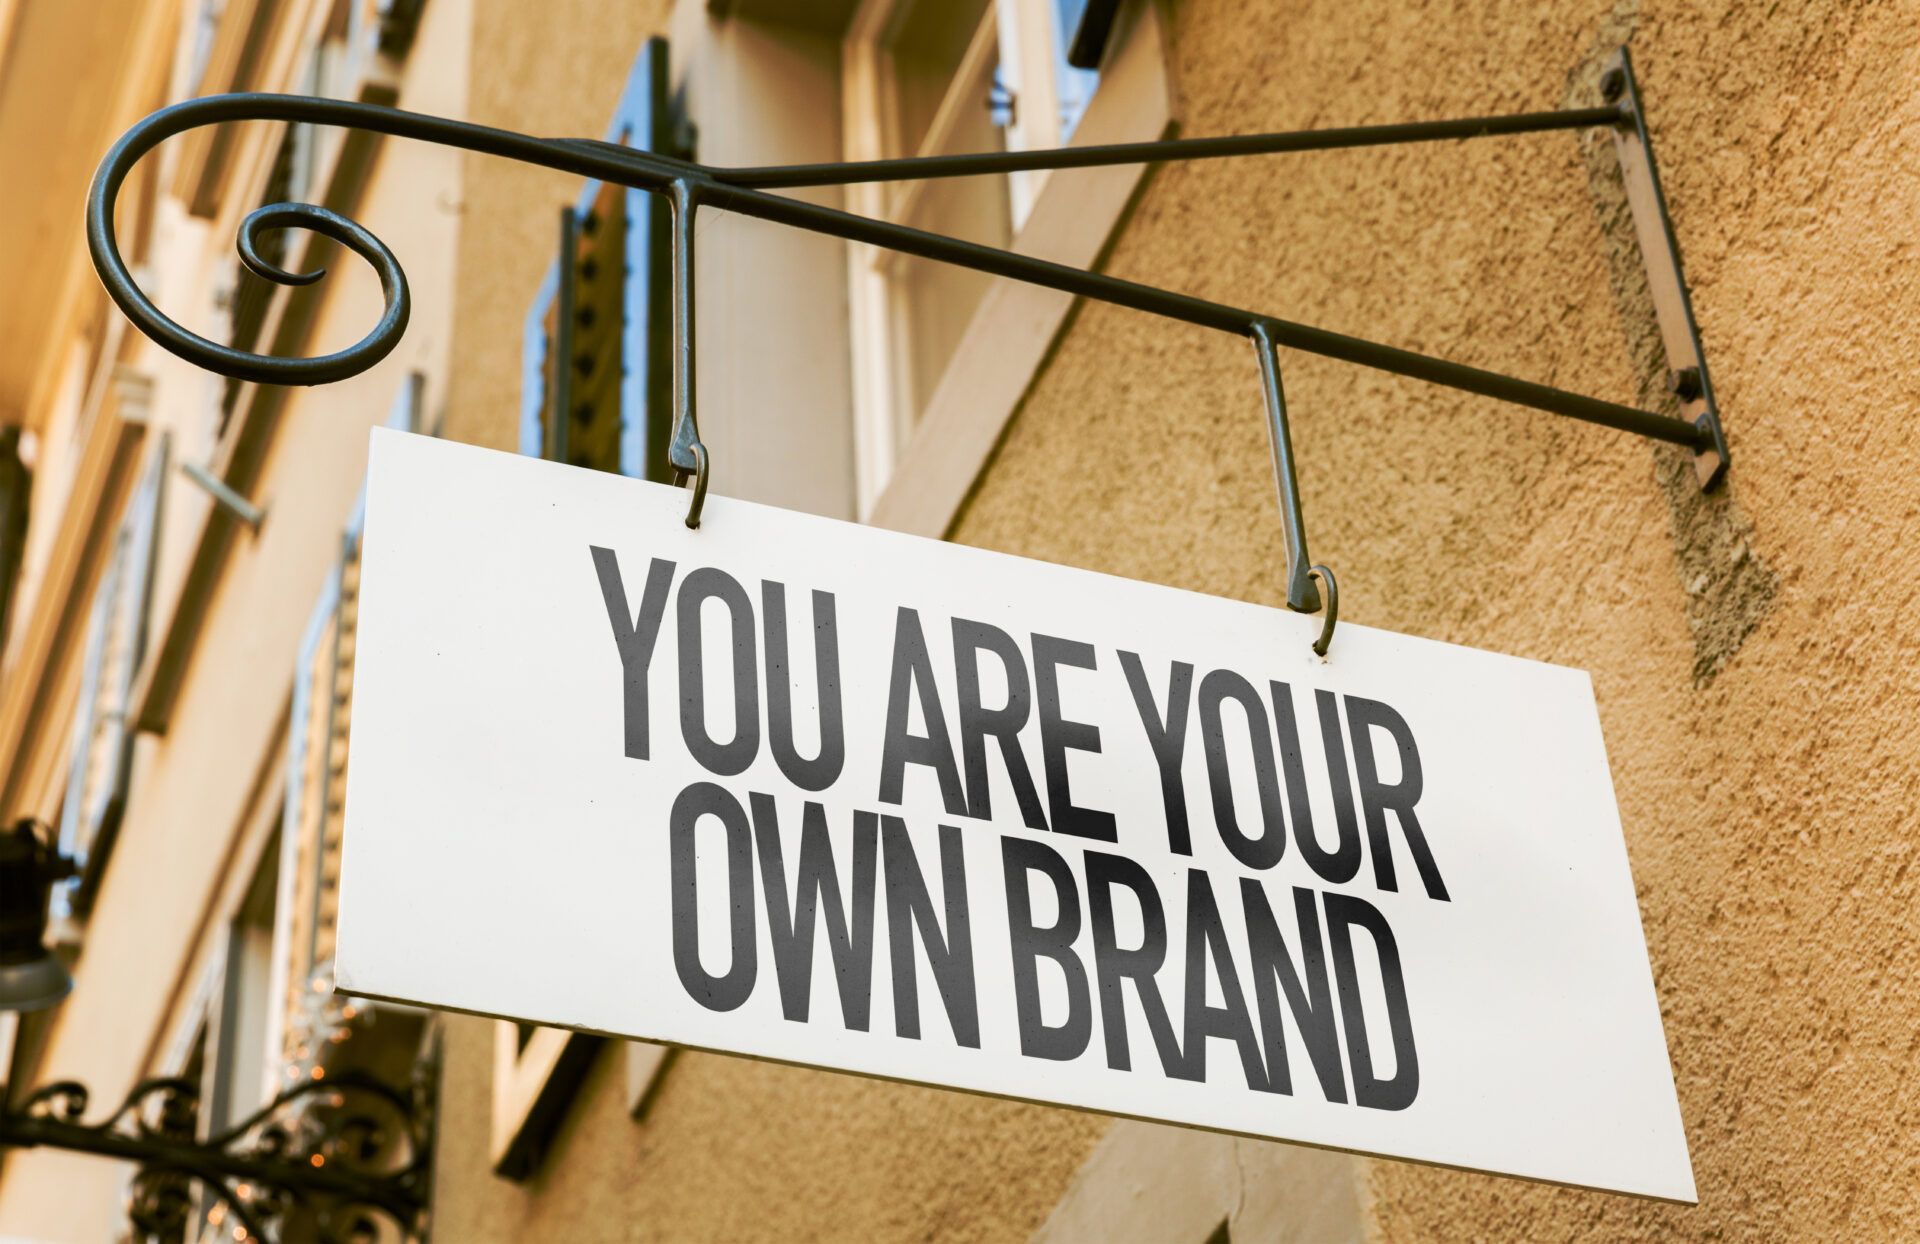 Hanging sign with wording "You are your own brand".